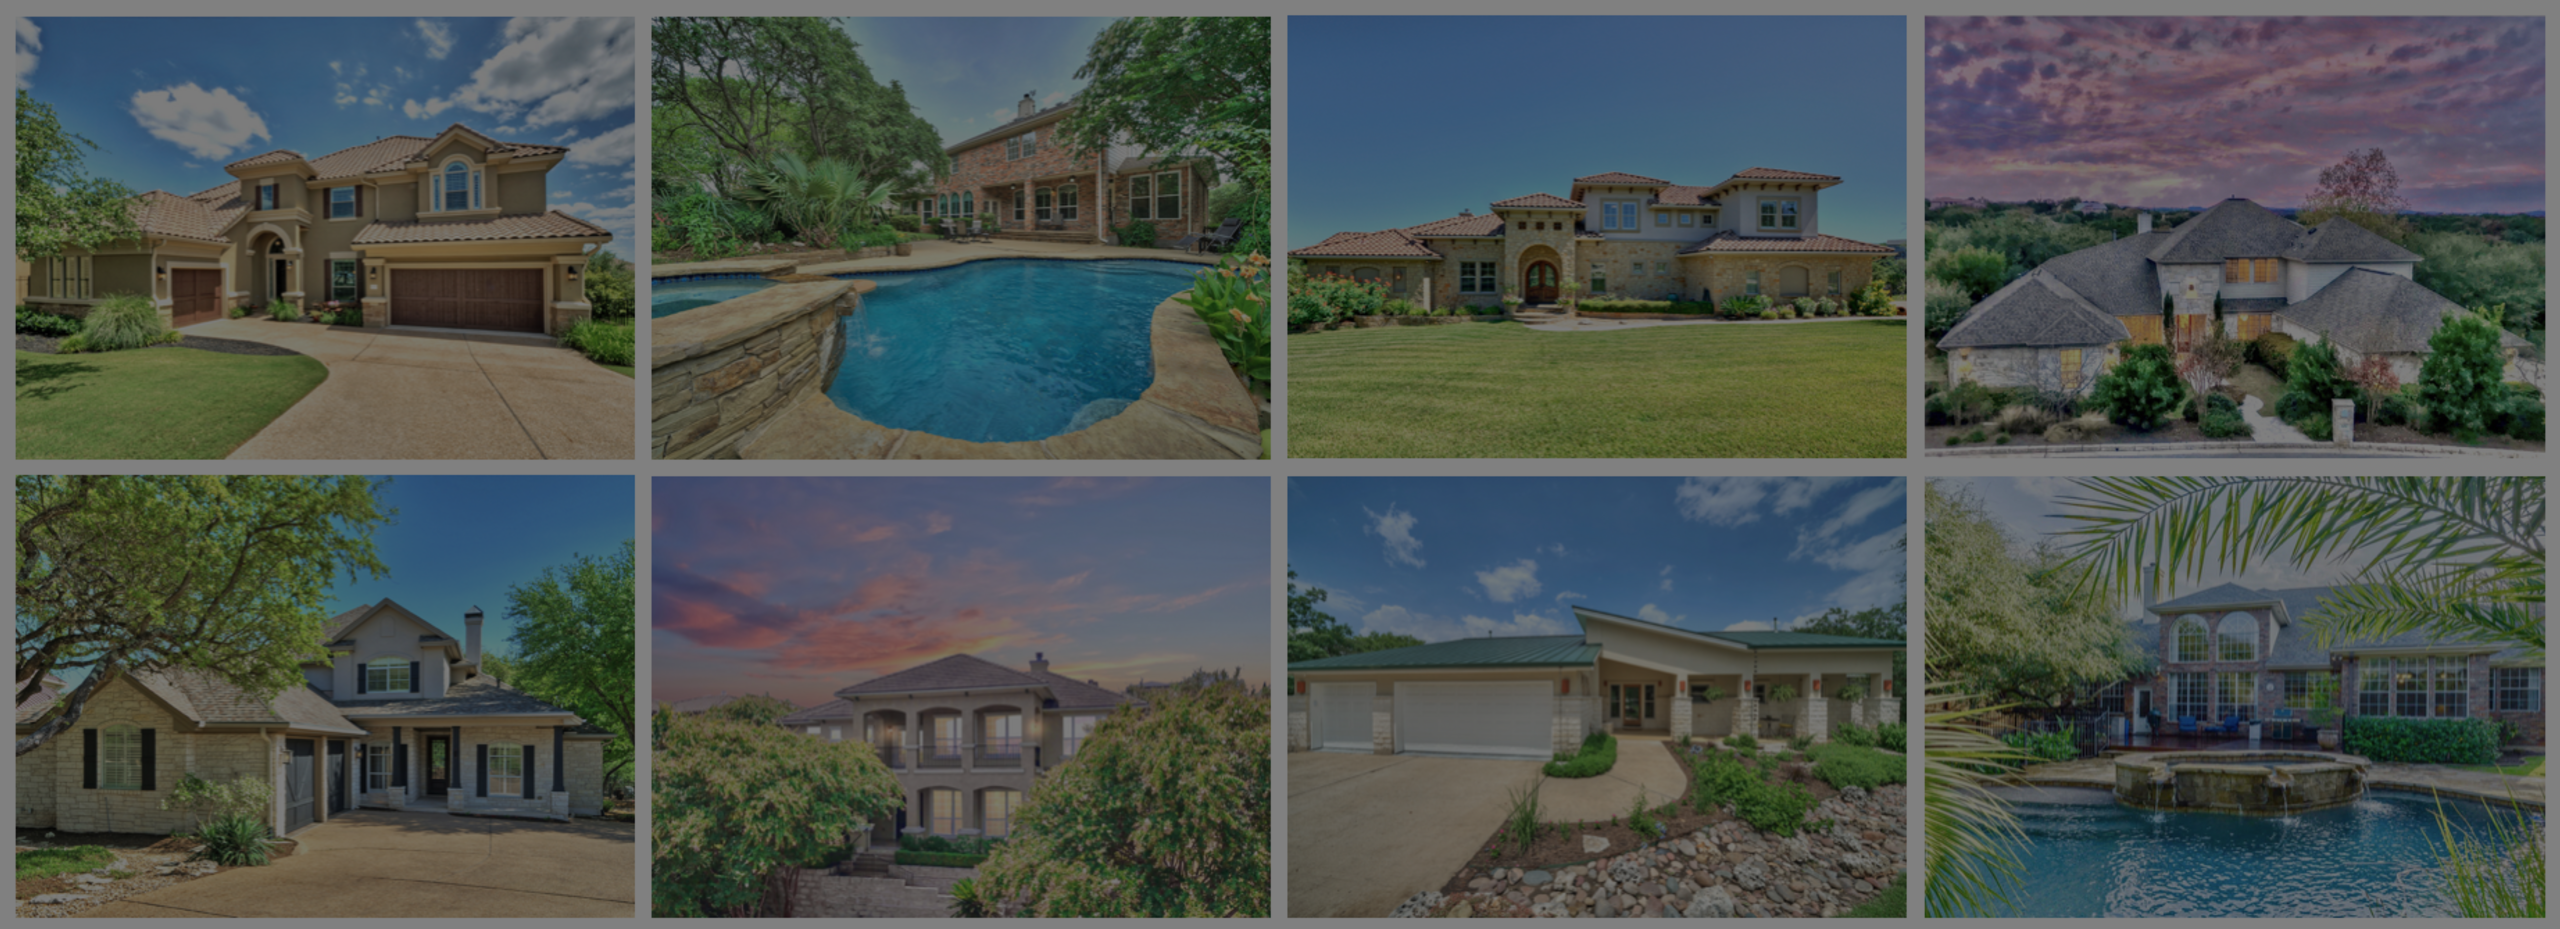 A FEW OF THE HOMES SOLD BY THE JULIE REISTRUP TEAM